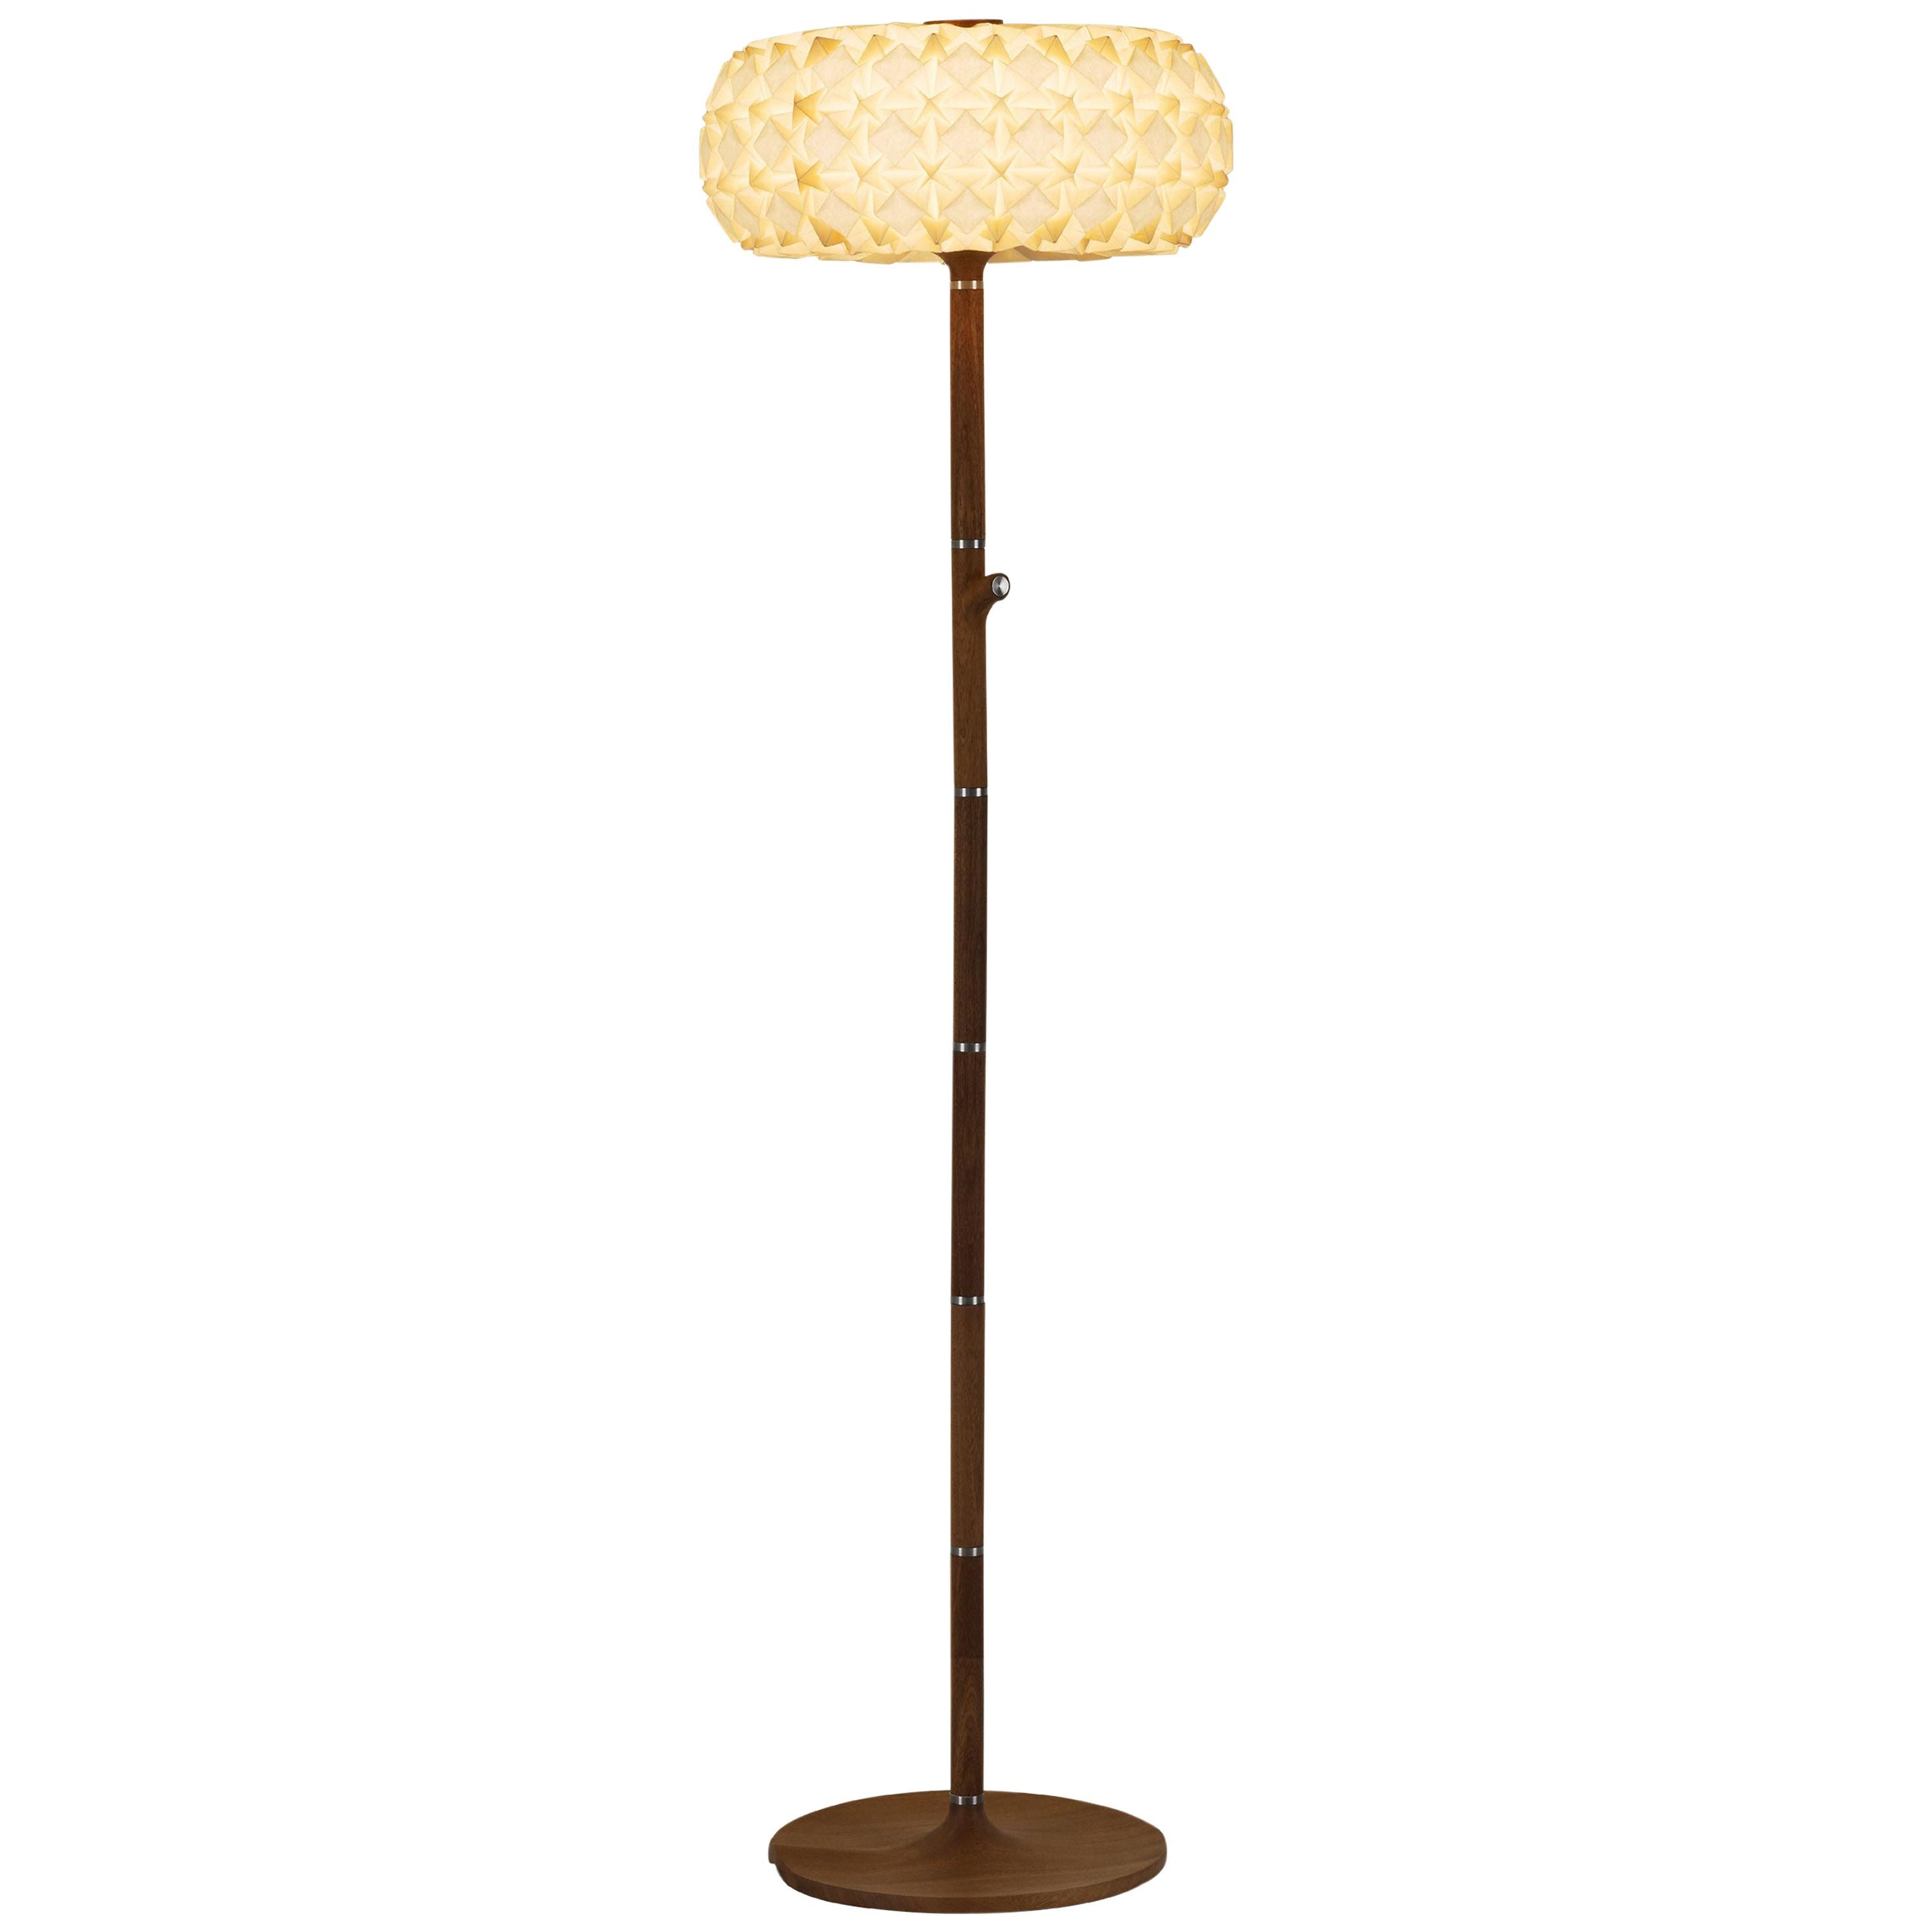 Origami Paper and Mahogany "96 Molecules" Floor Lamp by Aqua Creations For Sale